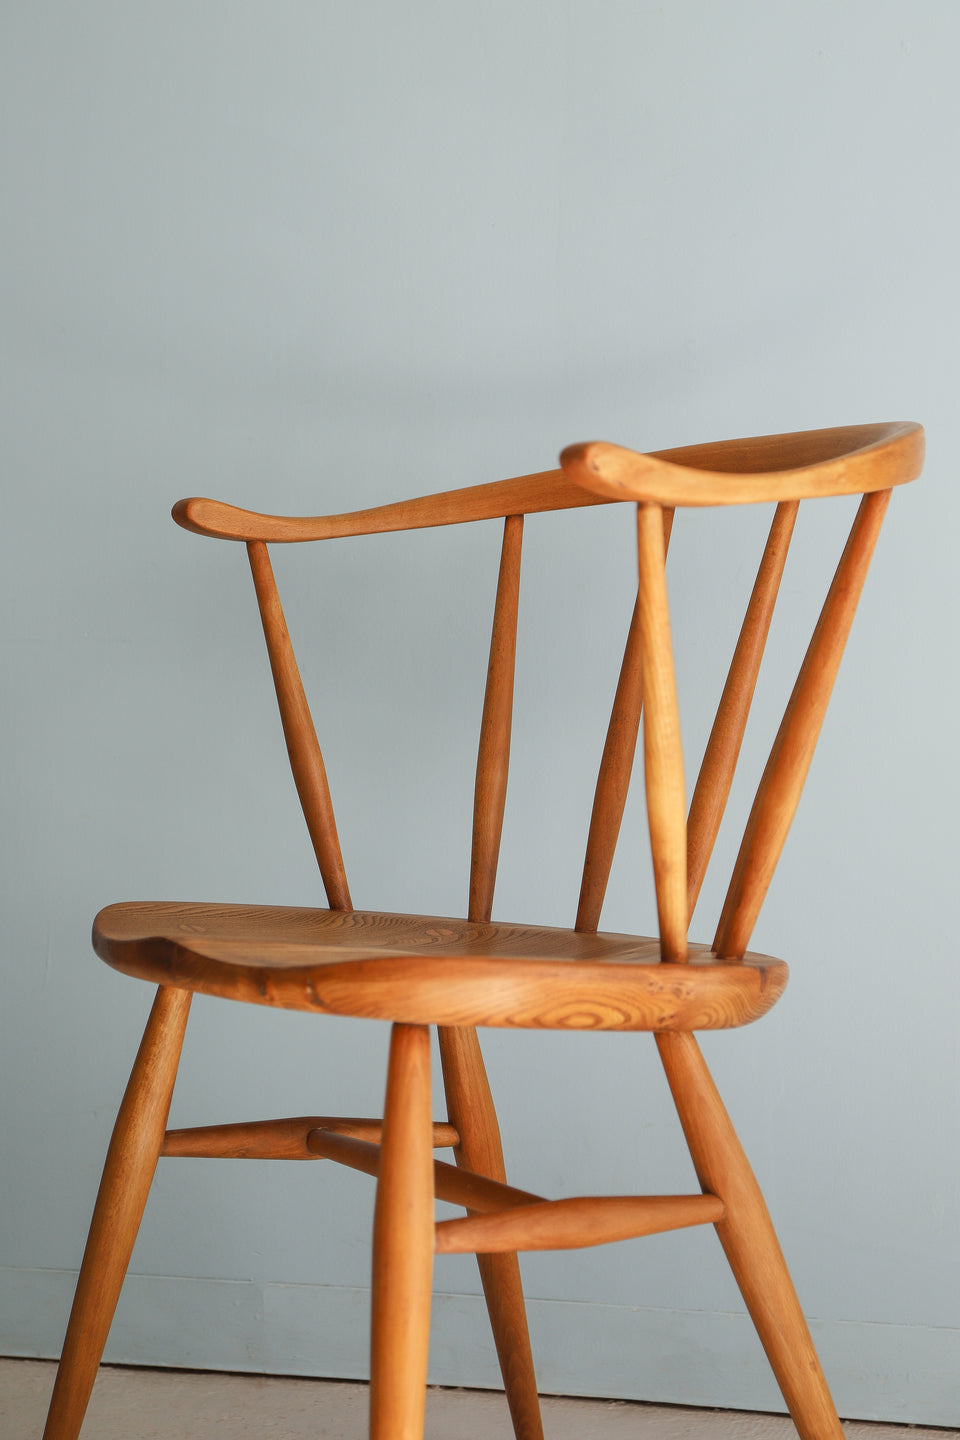 1950’s UK Vintage Ercol Windsor Chair Model 449A Cowhorn Smoker’s/イギリスヴィンテージ アーコール ウィンザーチェア カウホーン スモーカーズ 椅子